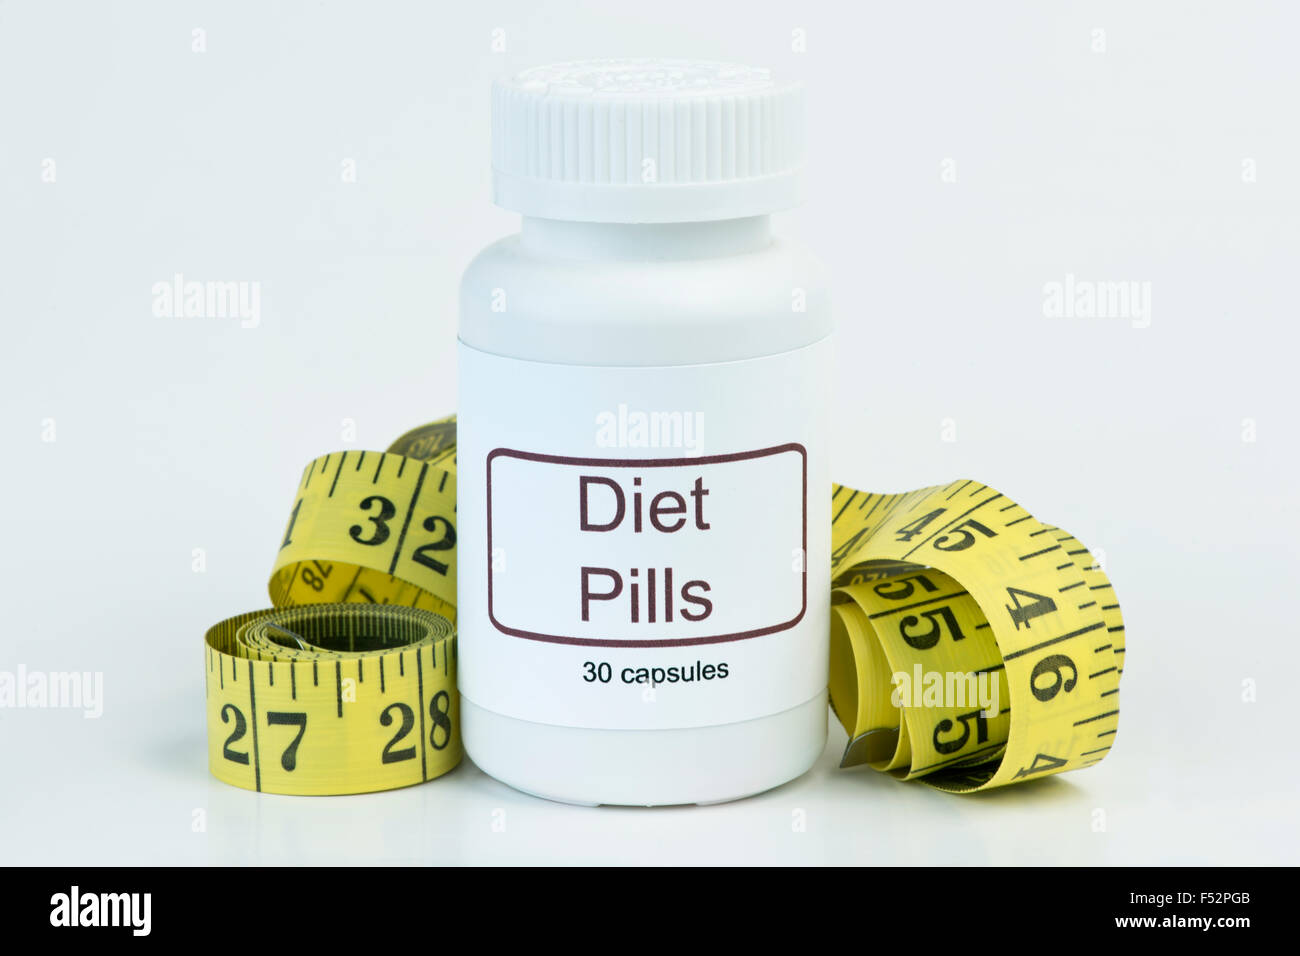 Container of diet pills with yellow tape measure. Stock Photo